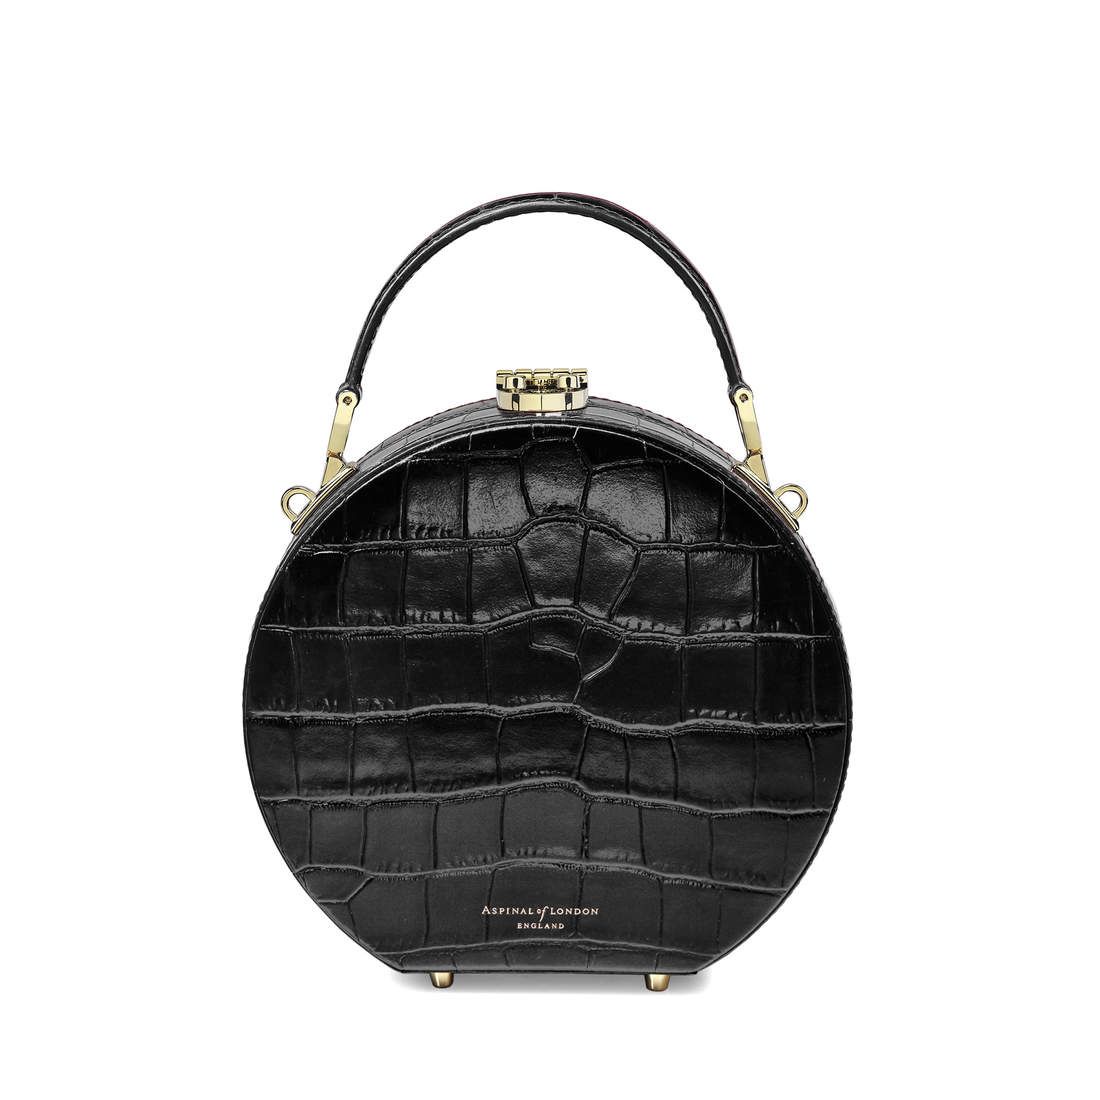 Hat Box in Deep Shine Black Croc with Narrow Strap | Aspinal of London